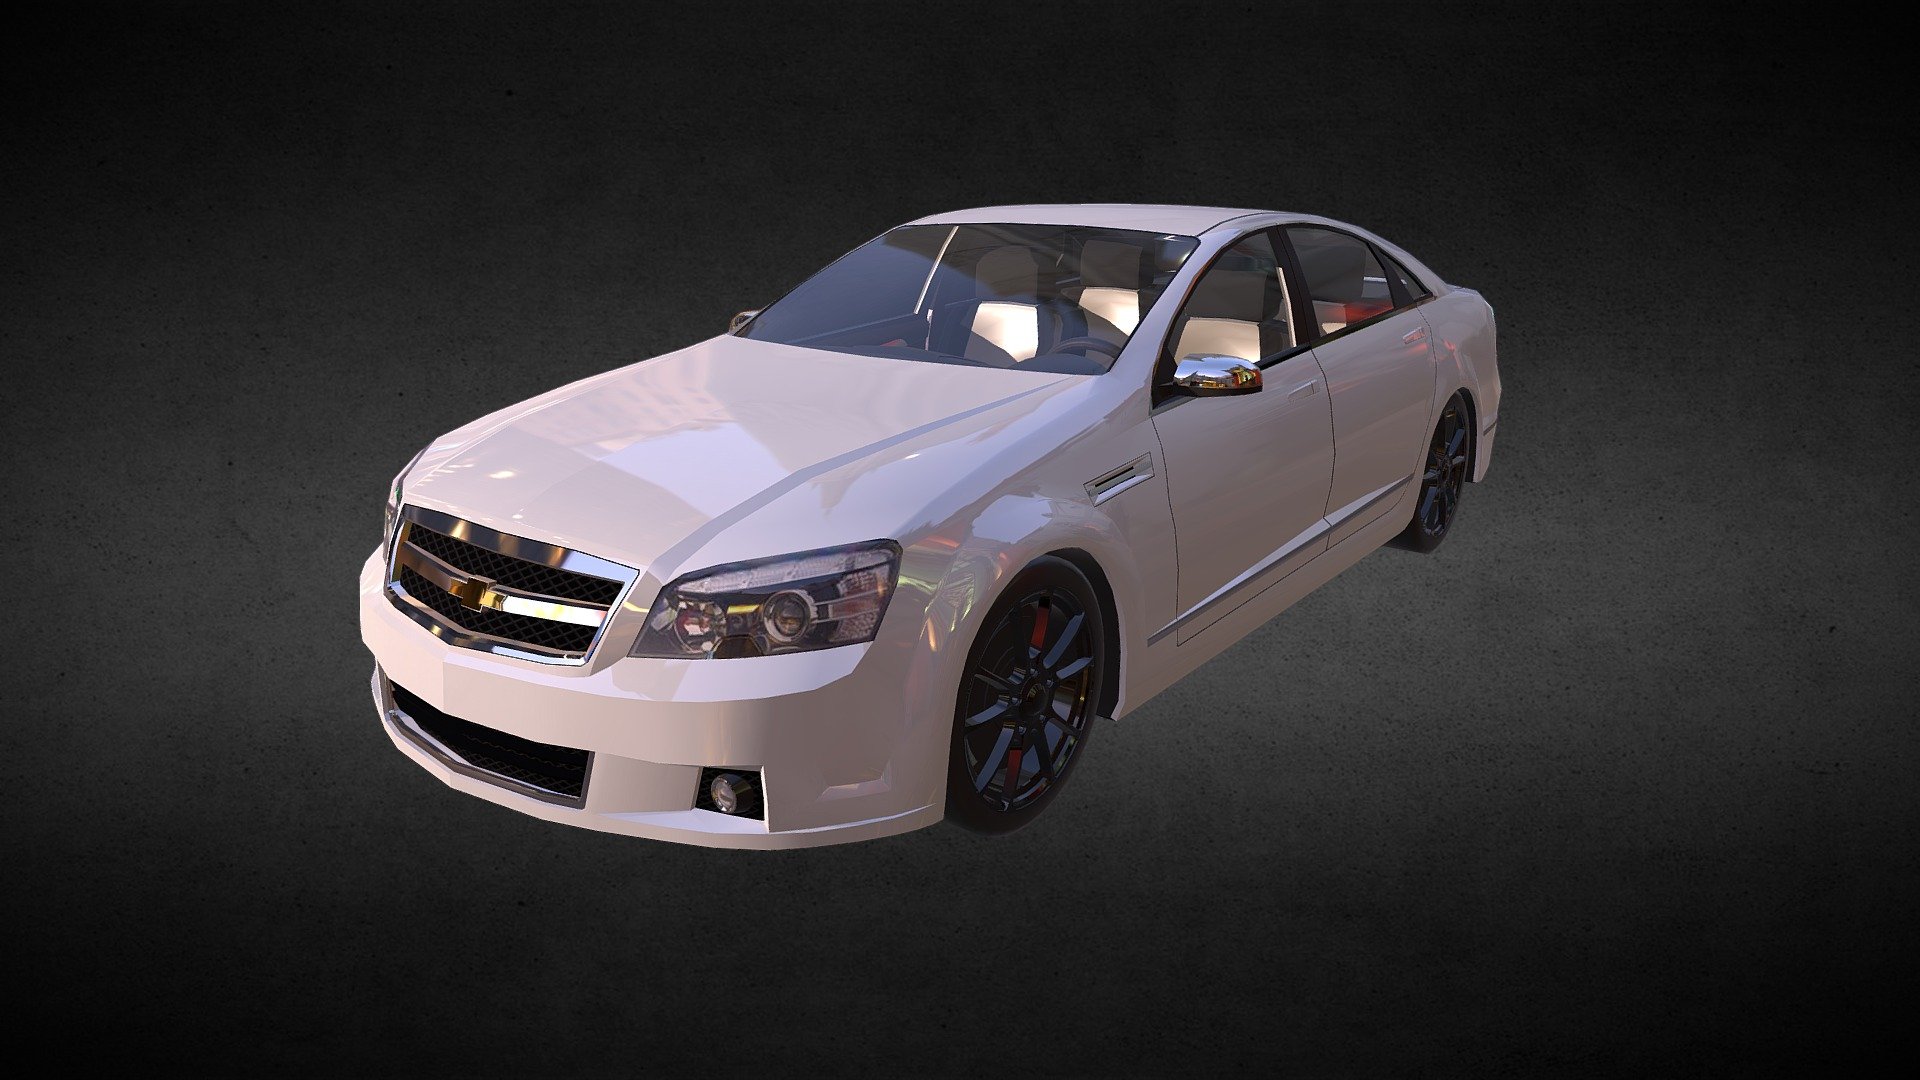 Detailed car model optimized for mobile games. Contains basic interior. Included 2k textures are made for Unity, but easily converted for other engines 3d model